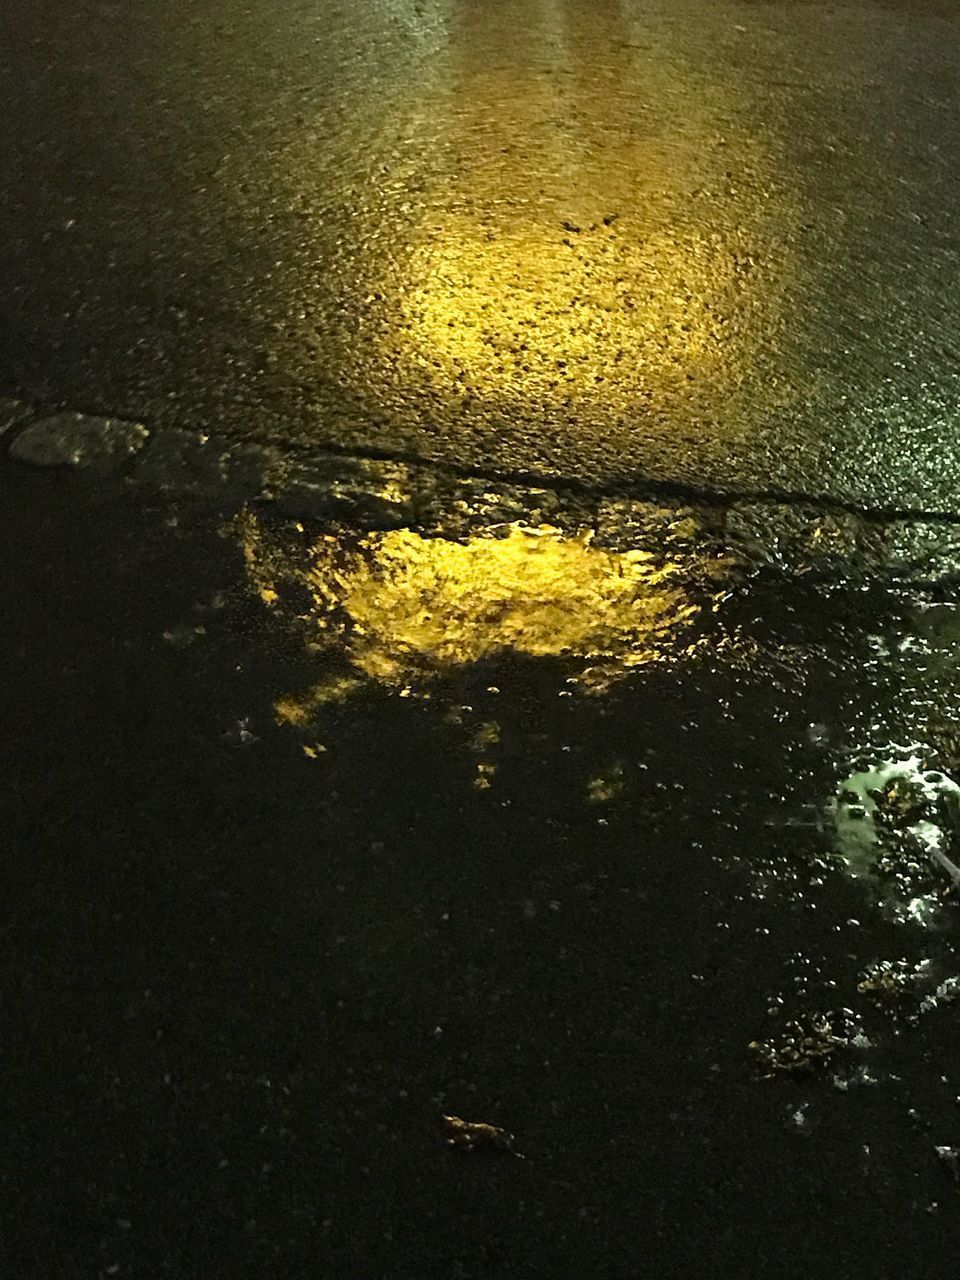 CLOSE-UP OF WET PUDDLE